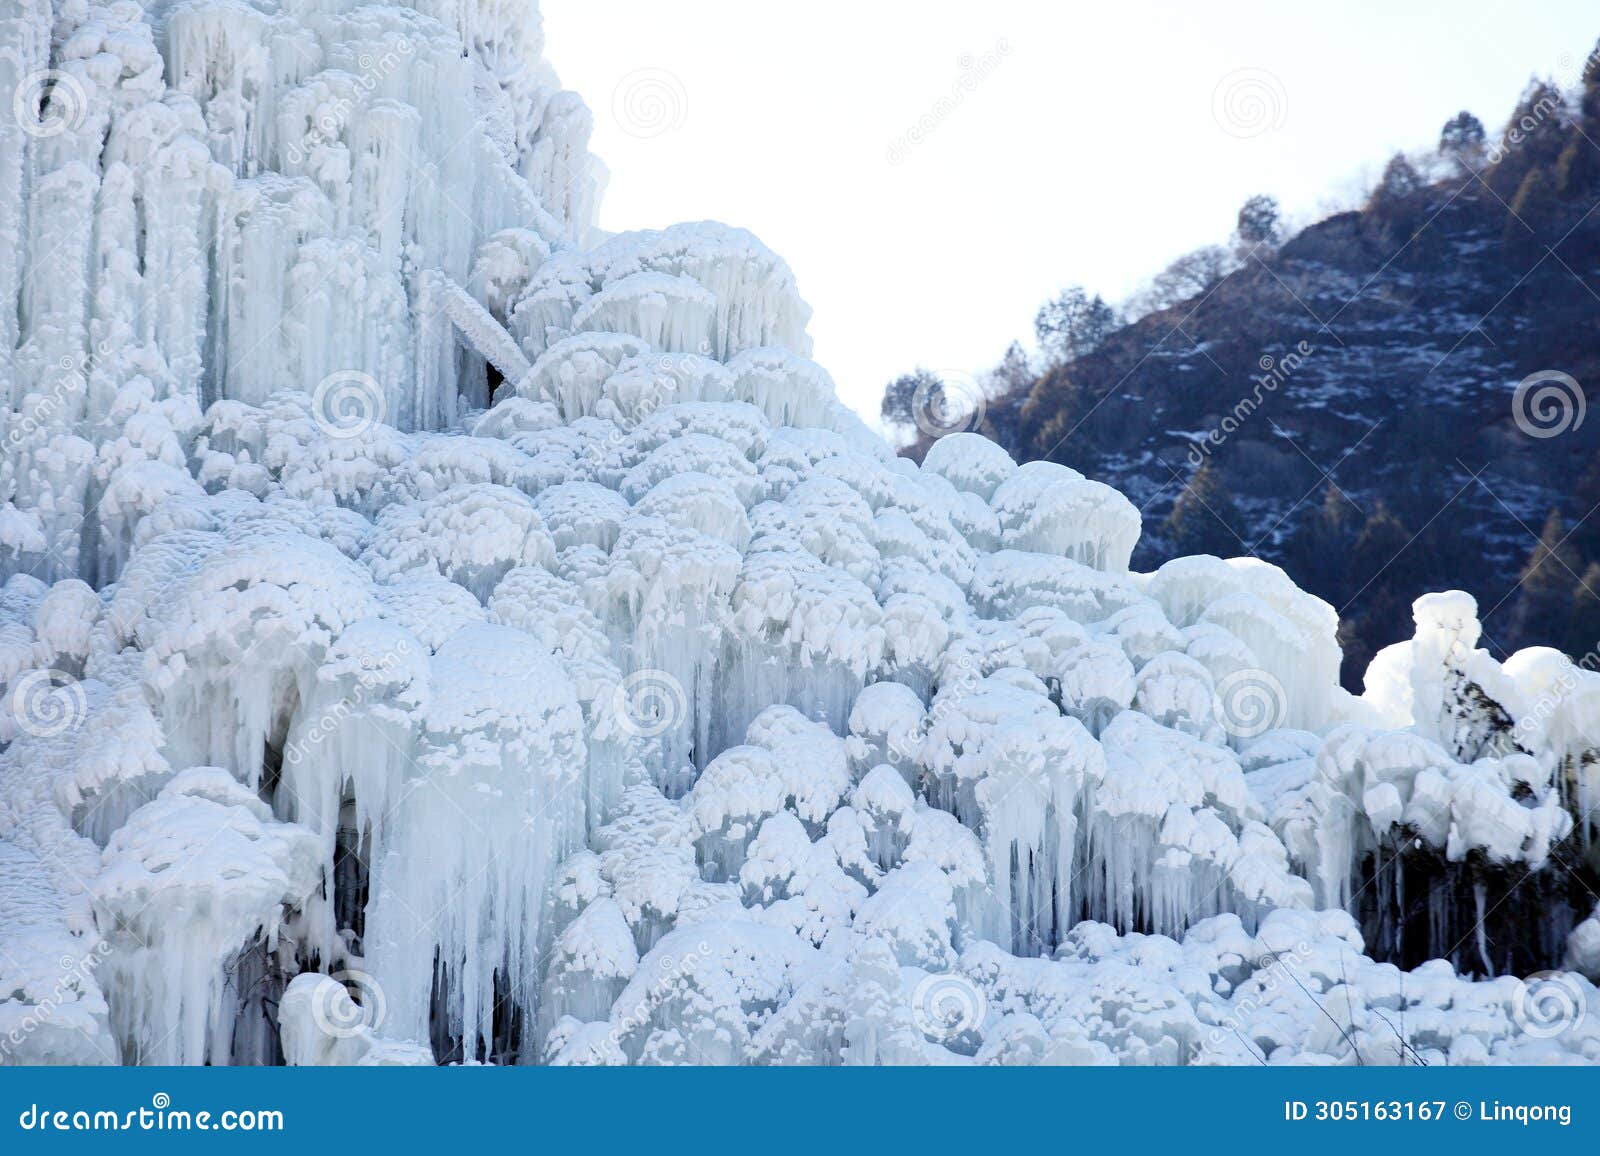 close-up shot of a spectacular icefall in the mountains.